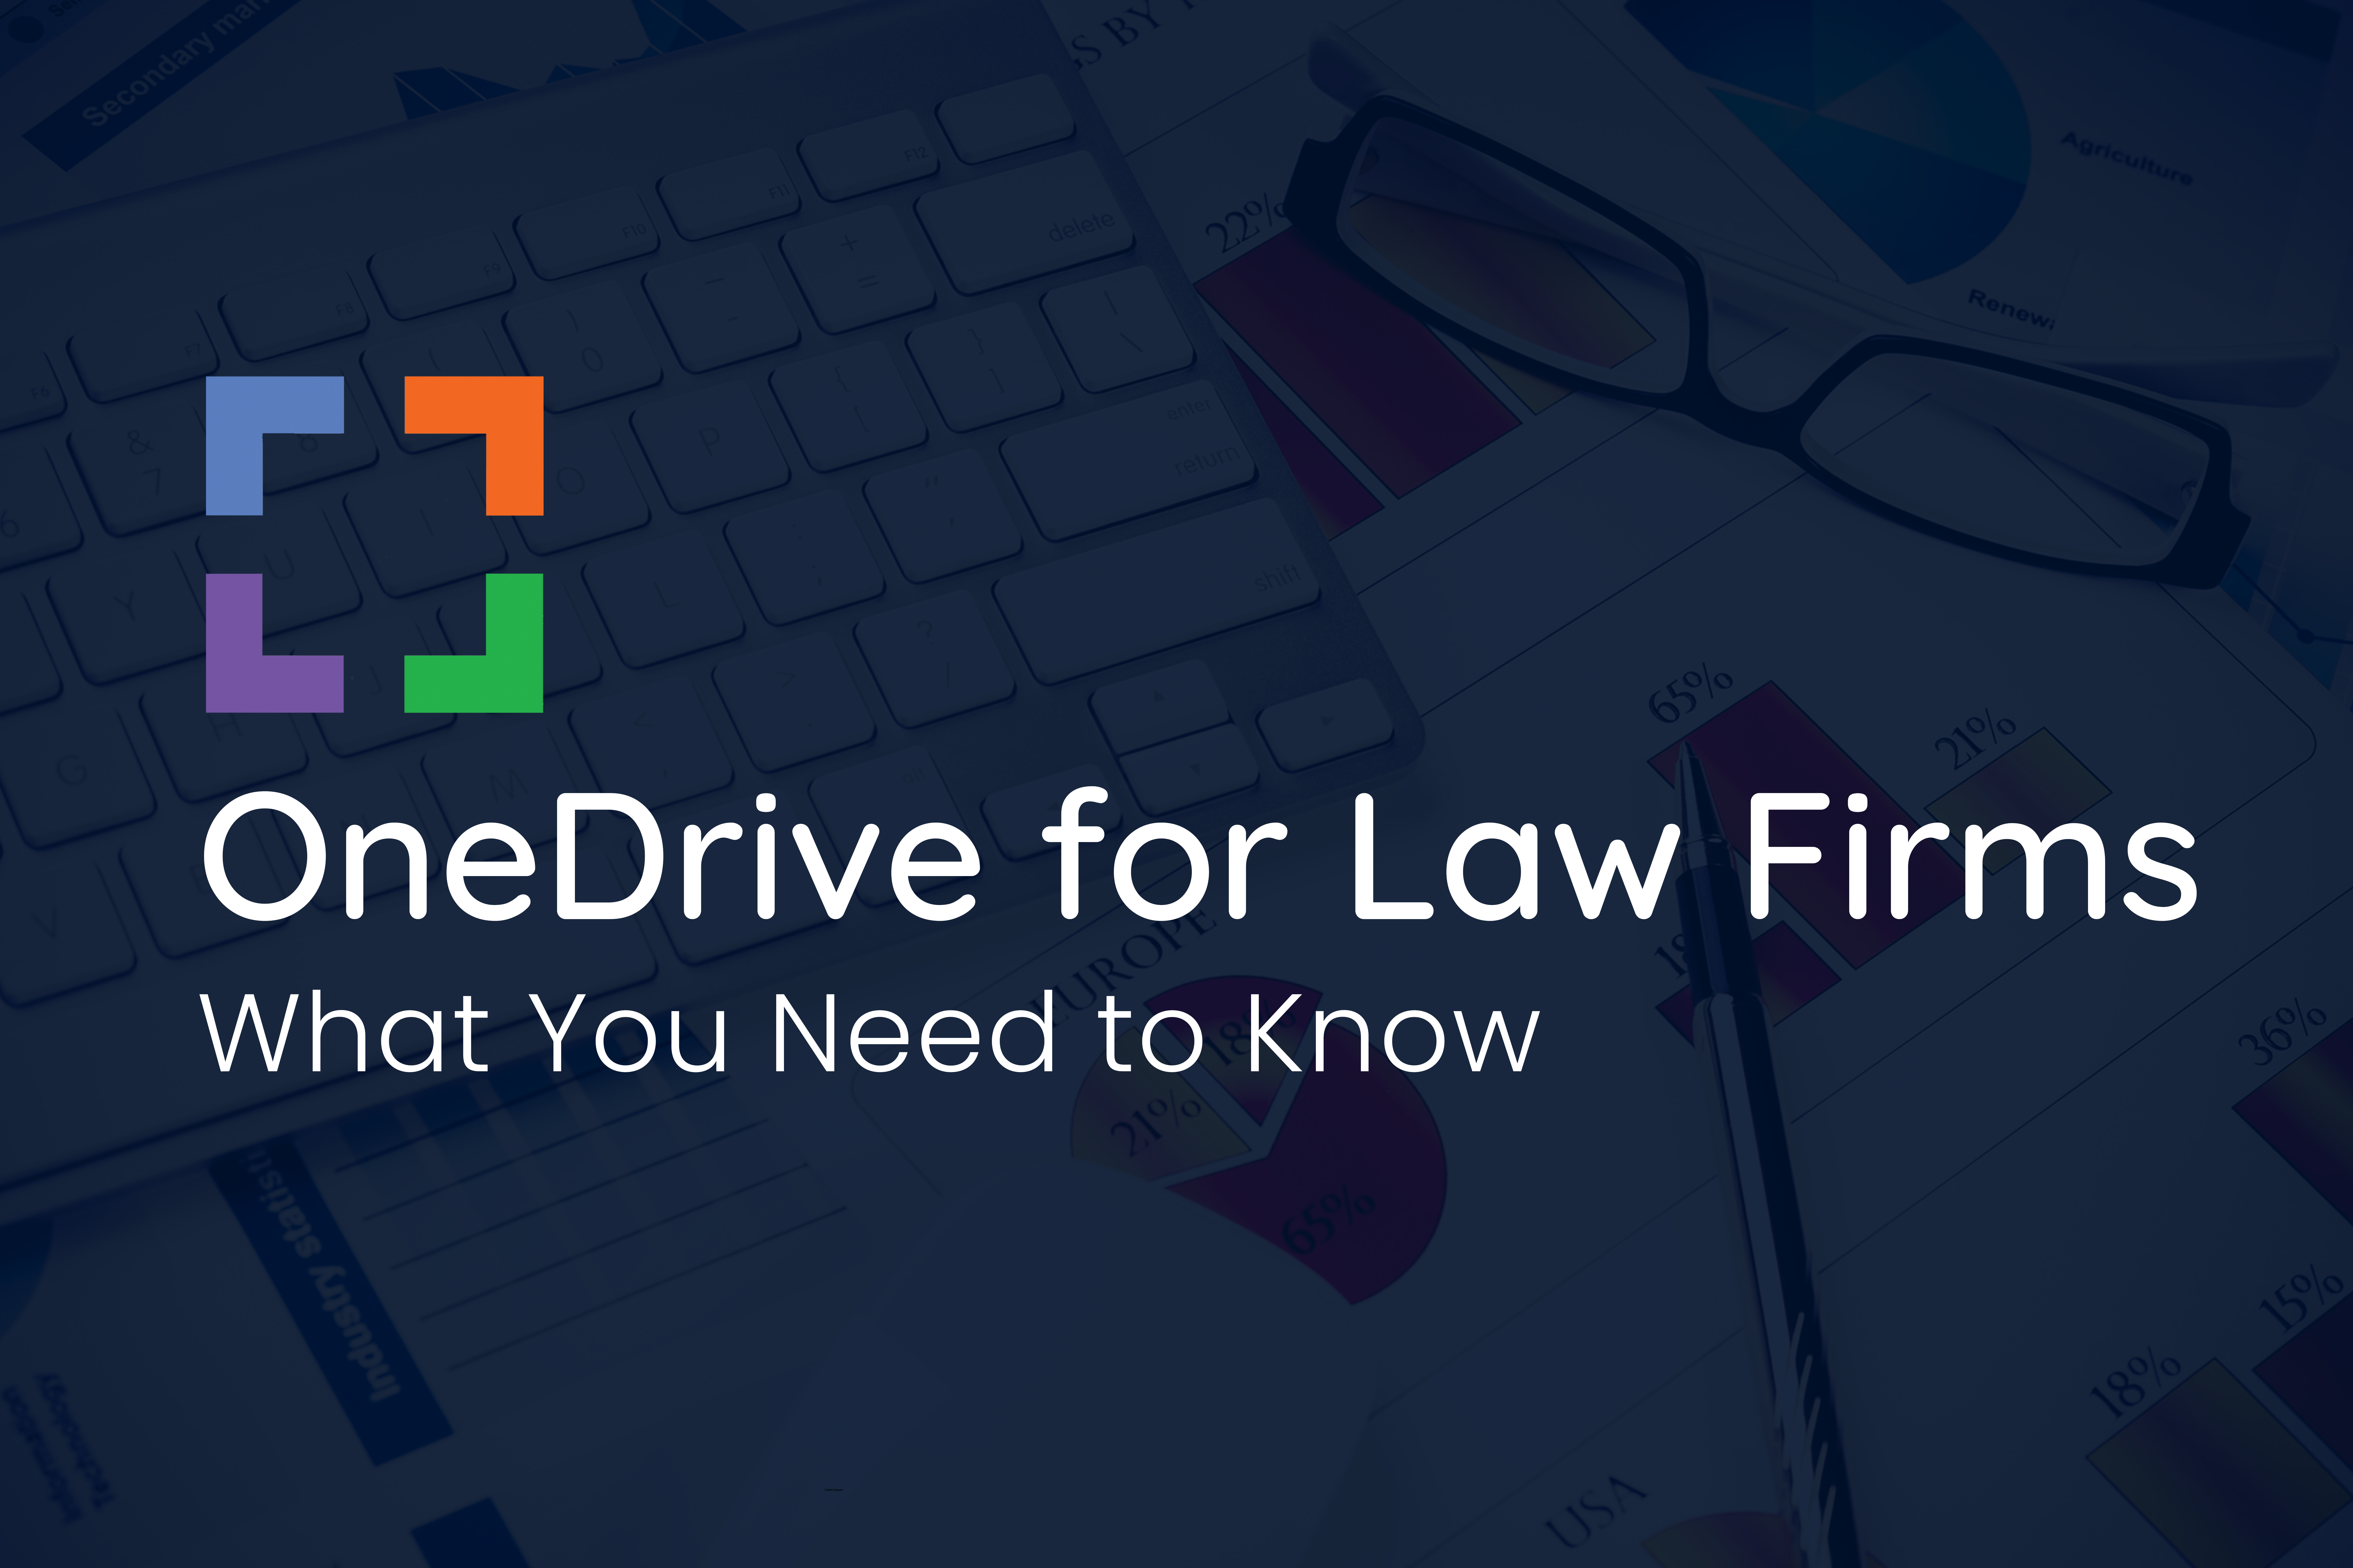 OneDrive for Law Firms